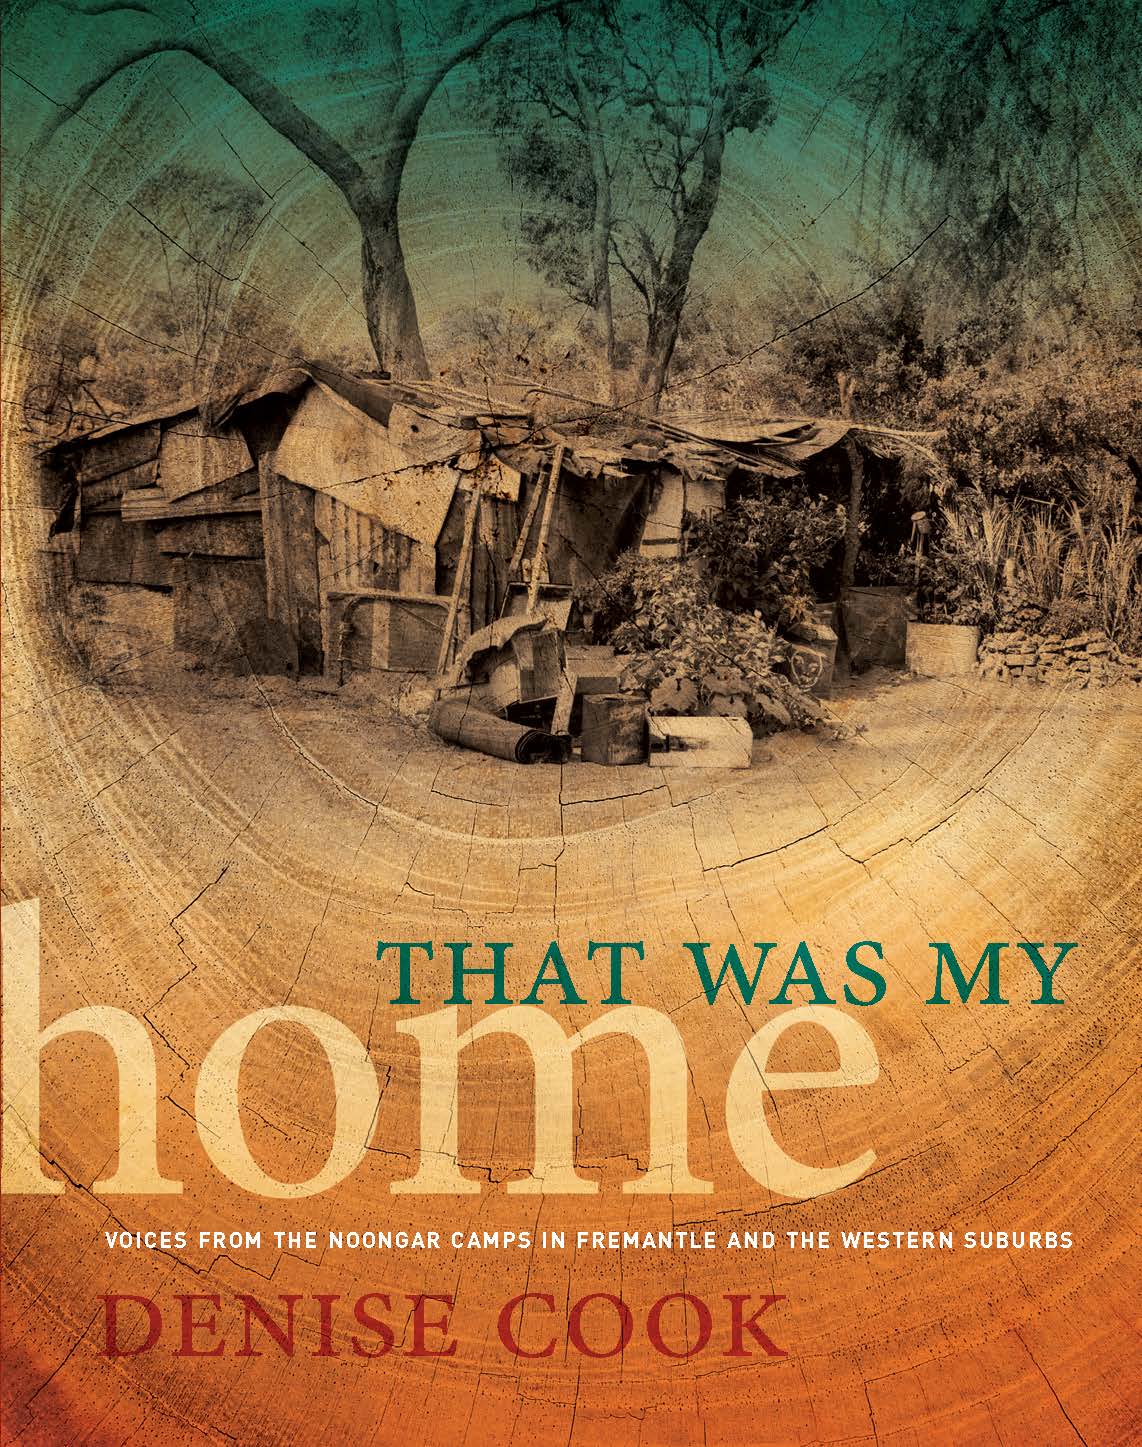 That Was My Home: Voices from the Noongar Camps in Fremantle and the Western Suburbs